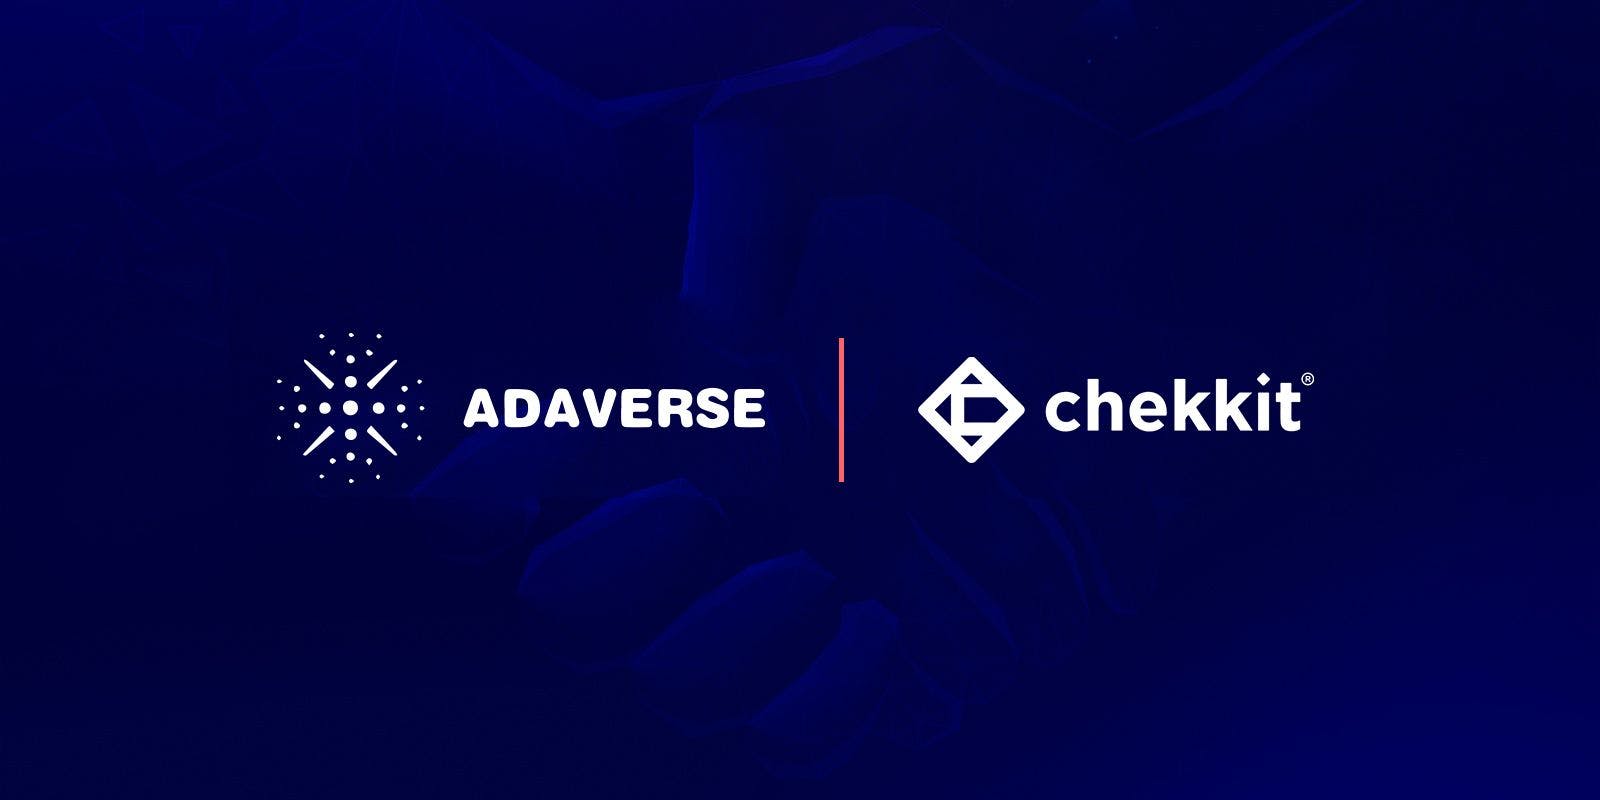 Chekkit Secures Funding from Adaverse to Bolster its Anti-Counterfeit Healthtech Solution with Cardano Blockchain